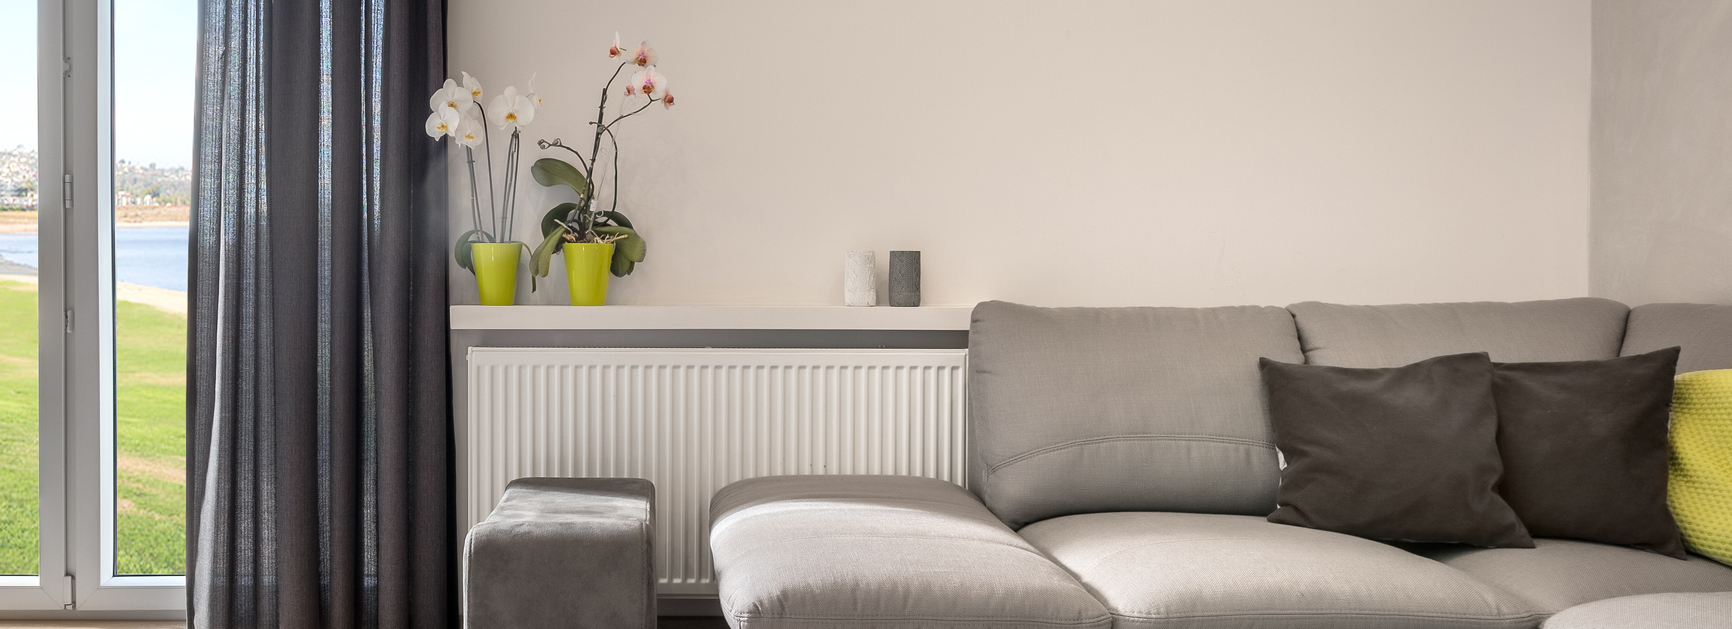 Central Heating Radiator in living room